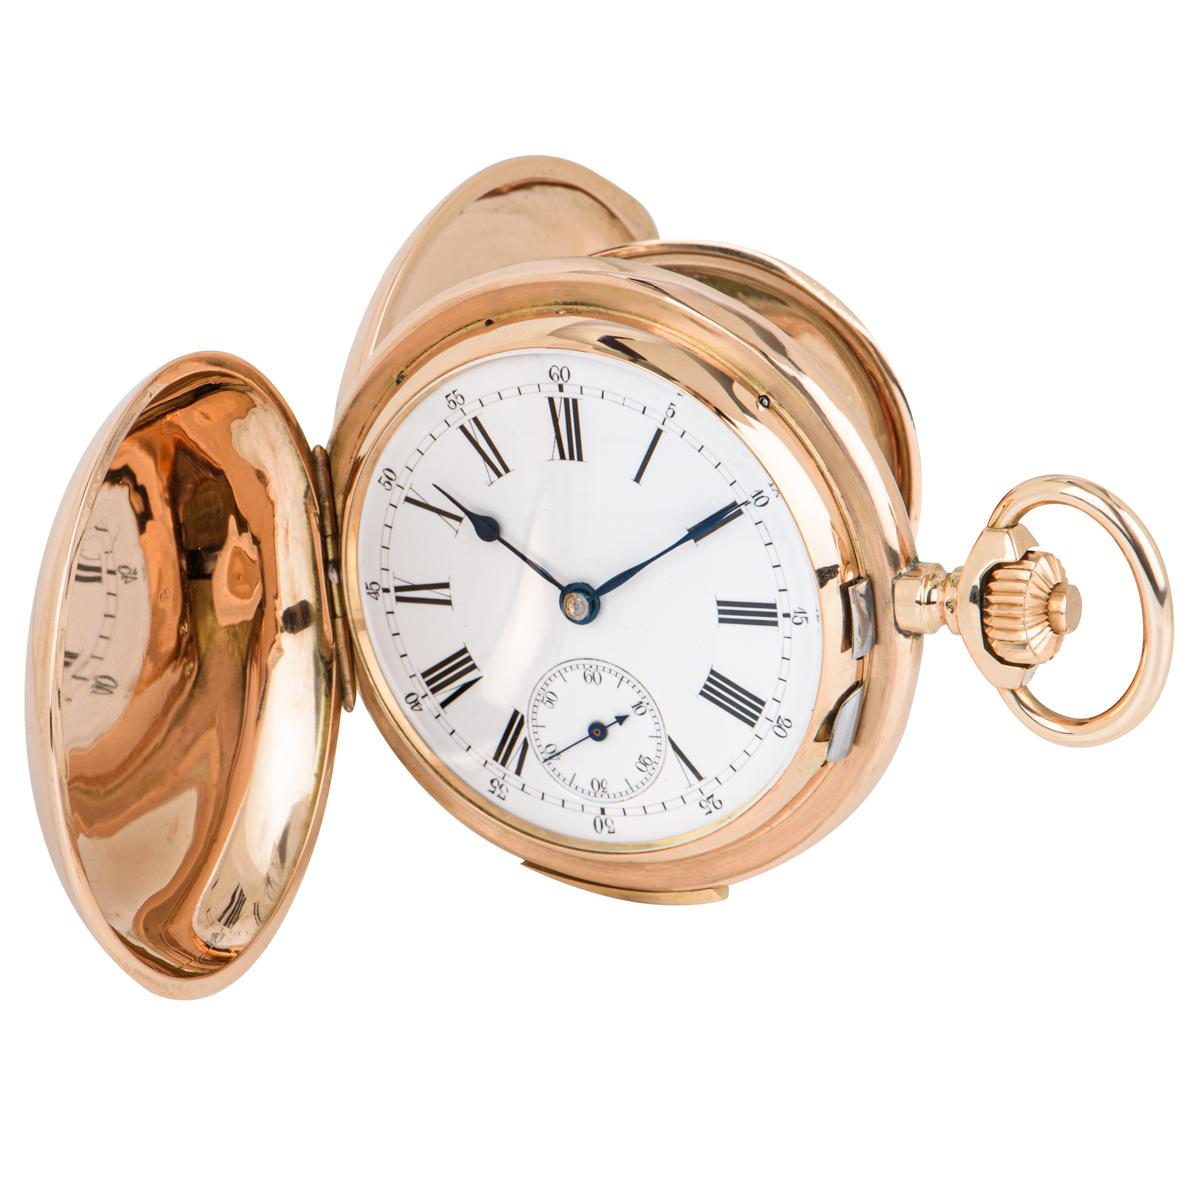 A 14ct Rose Gold Erotic Automaton Swiss Full Hunter Quarter Repeater Keyless Lever Pocket Watch C1890s.

Dial: A white enamel dial with Roman Numerals outer minute track with Arabic numerals, a sub second dial with blued steel spade hands.

Case: